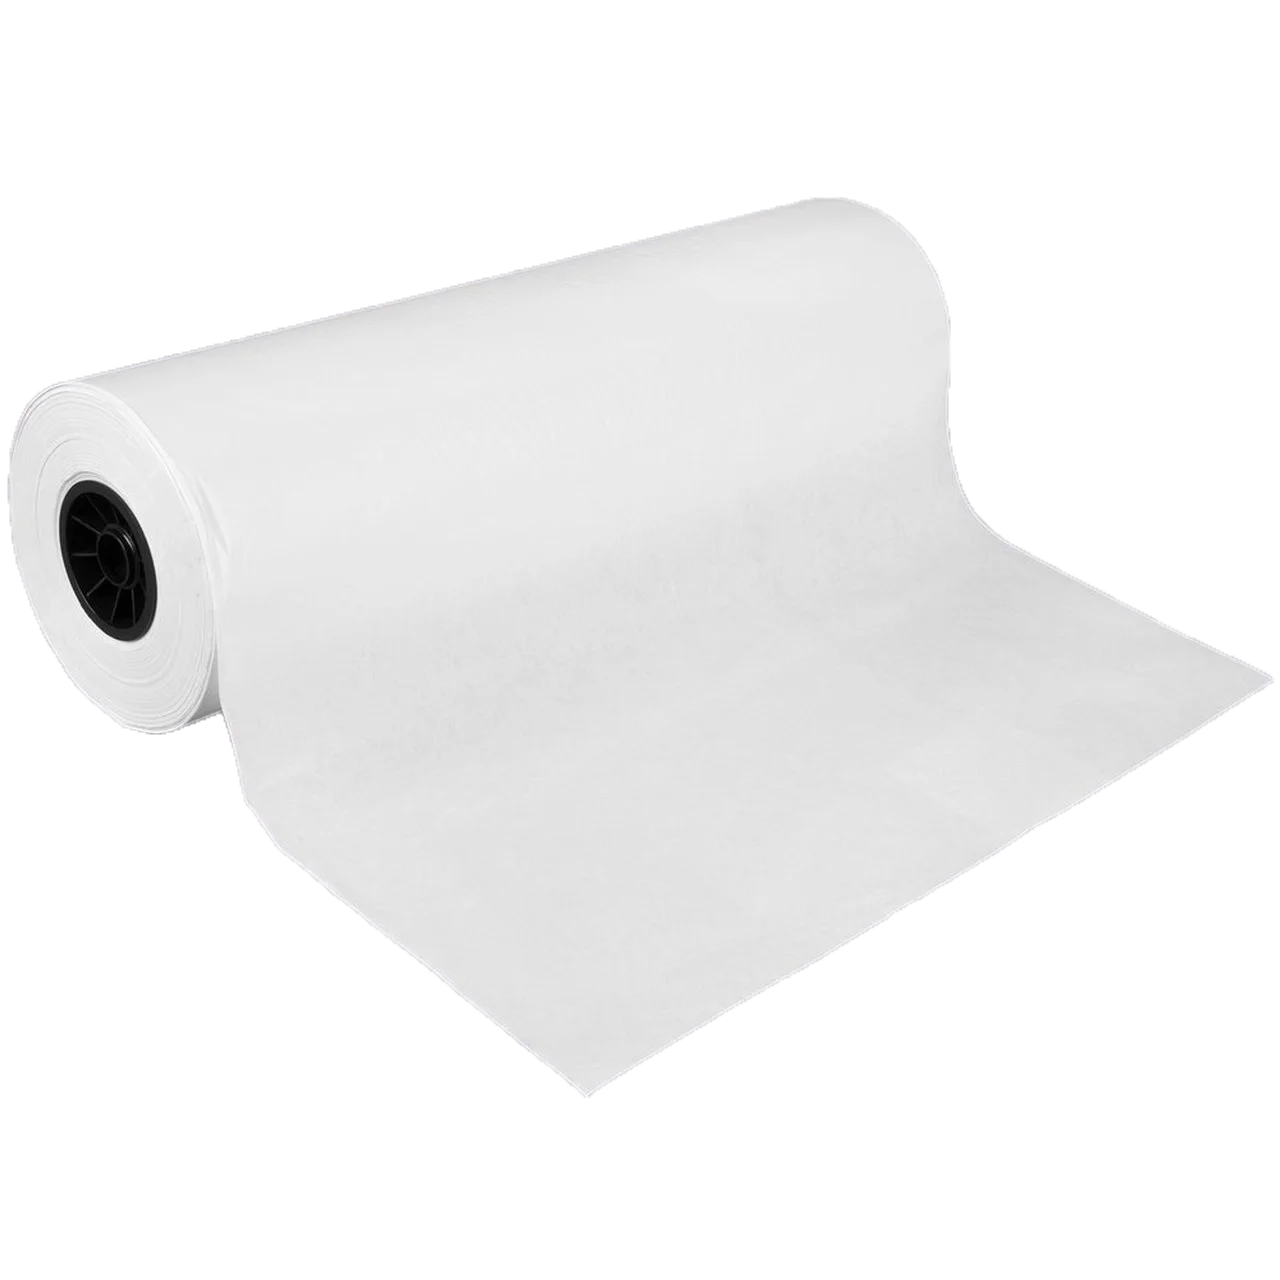 2 Ply Oem Kitchentissue Wholesale Kitchen Paper Towel Roll - Buy 2 Ply ...